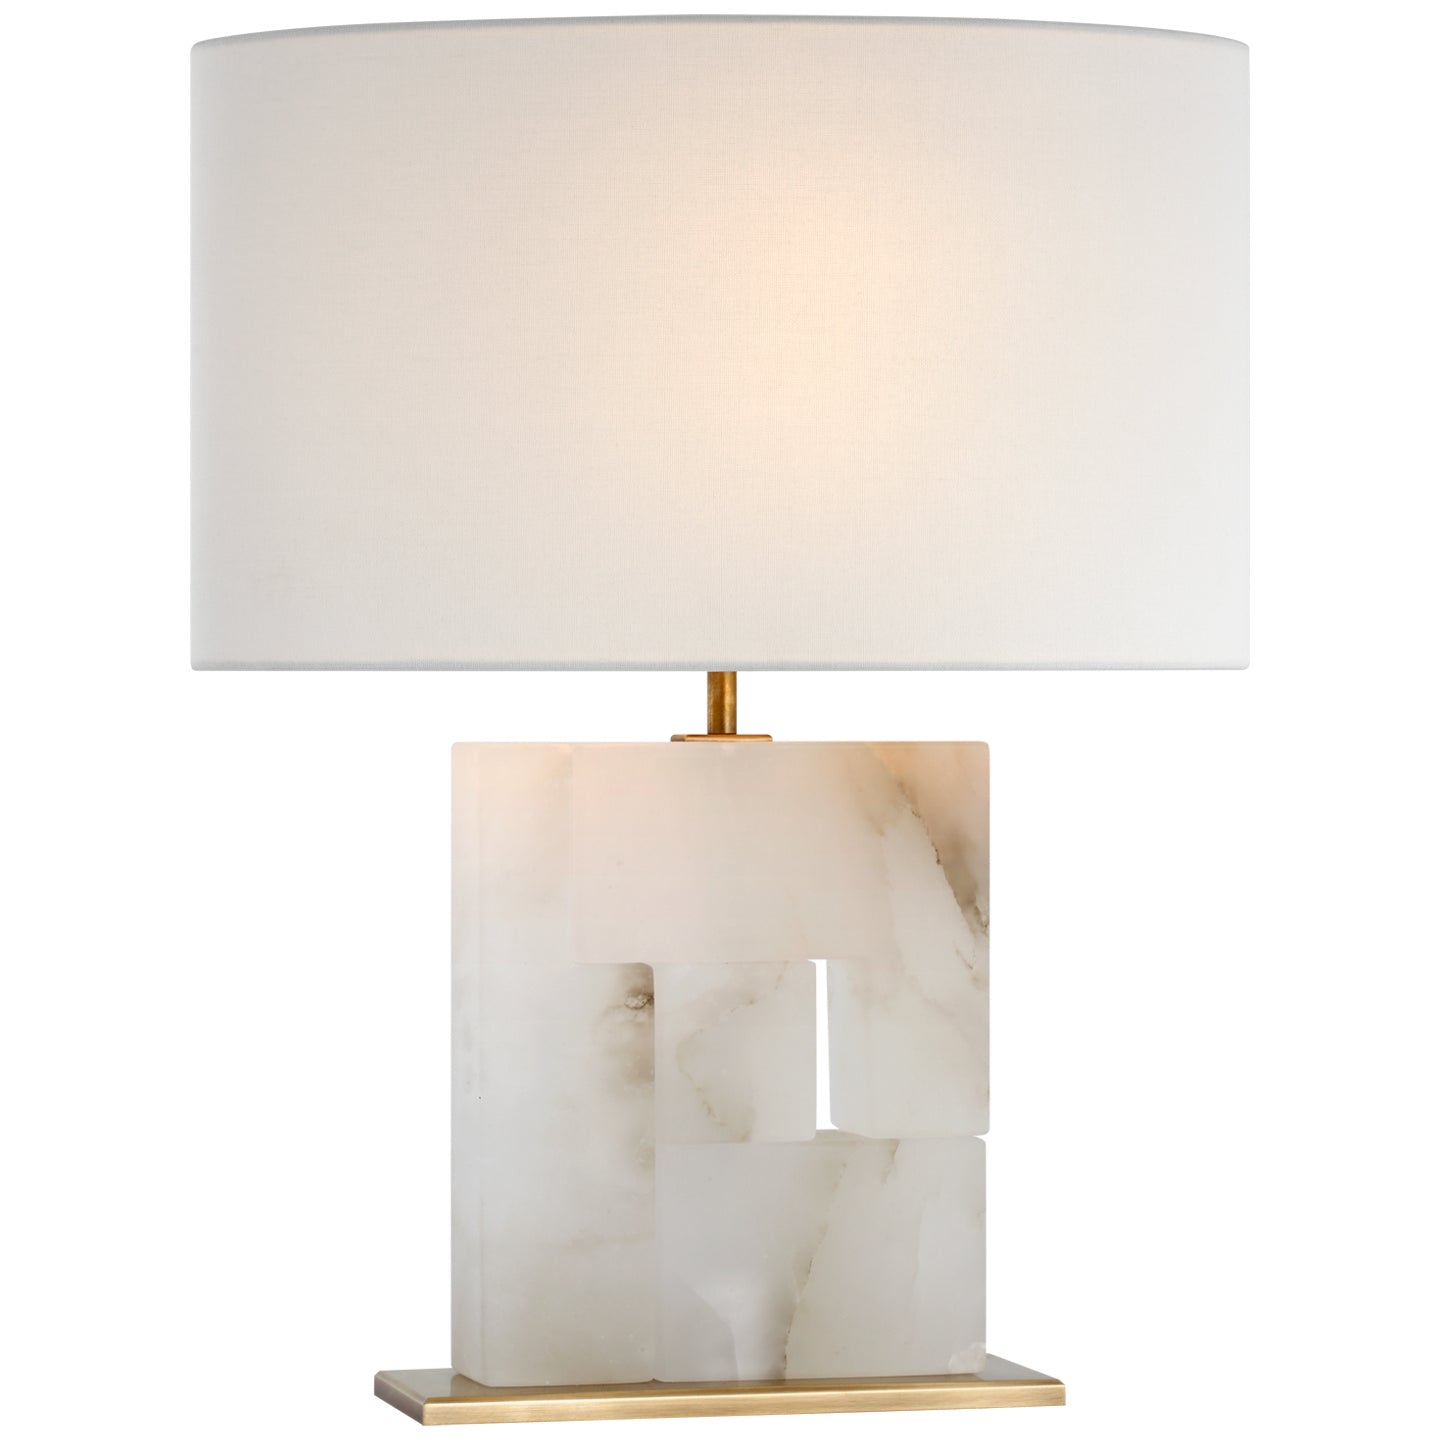 Load image into Gallery viewer, Visual Comfort Signature - S 3925ALB/HAB-L - LED Table Lamp - Ashlar - Alabaster and Hand-Rubbed Antique Brass
